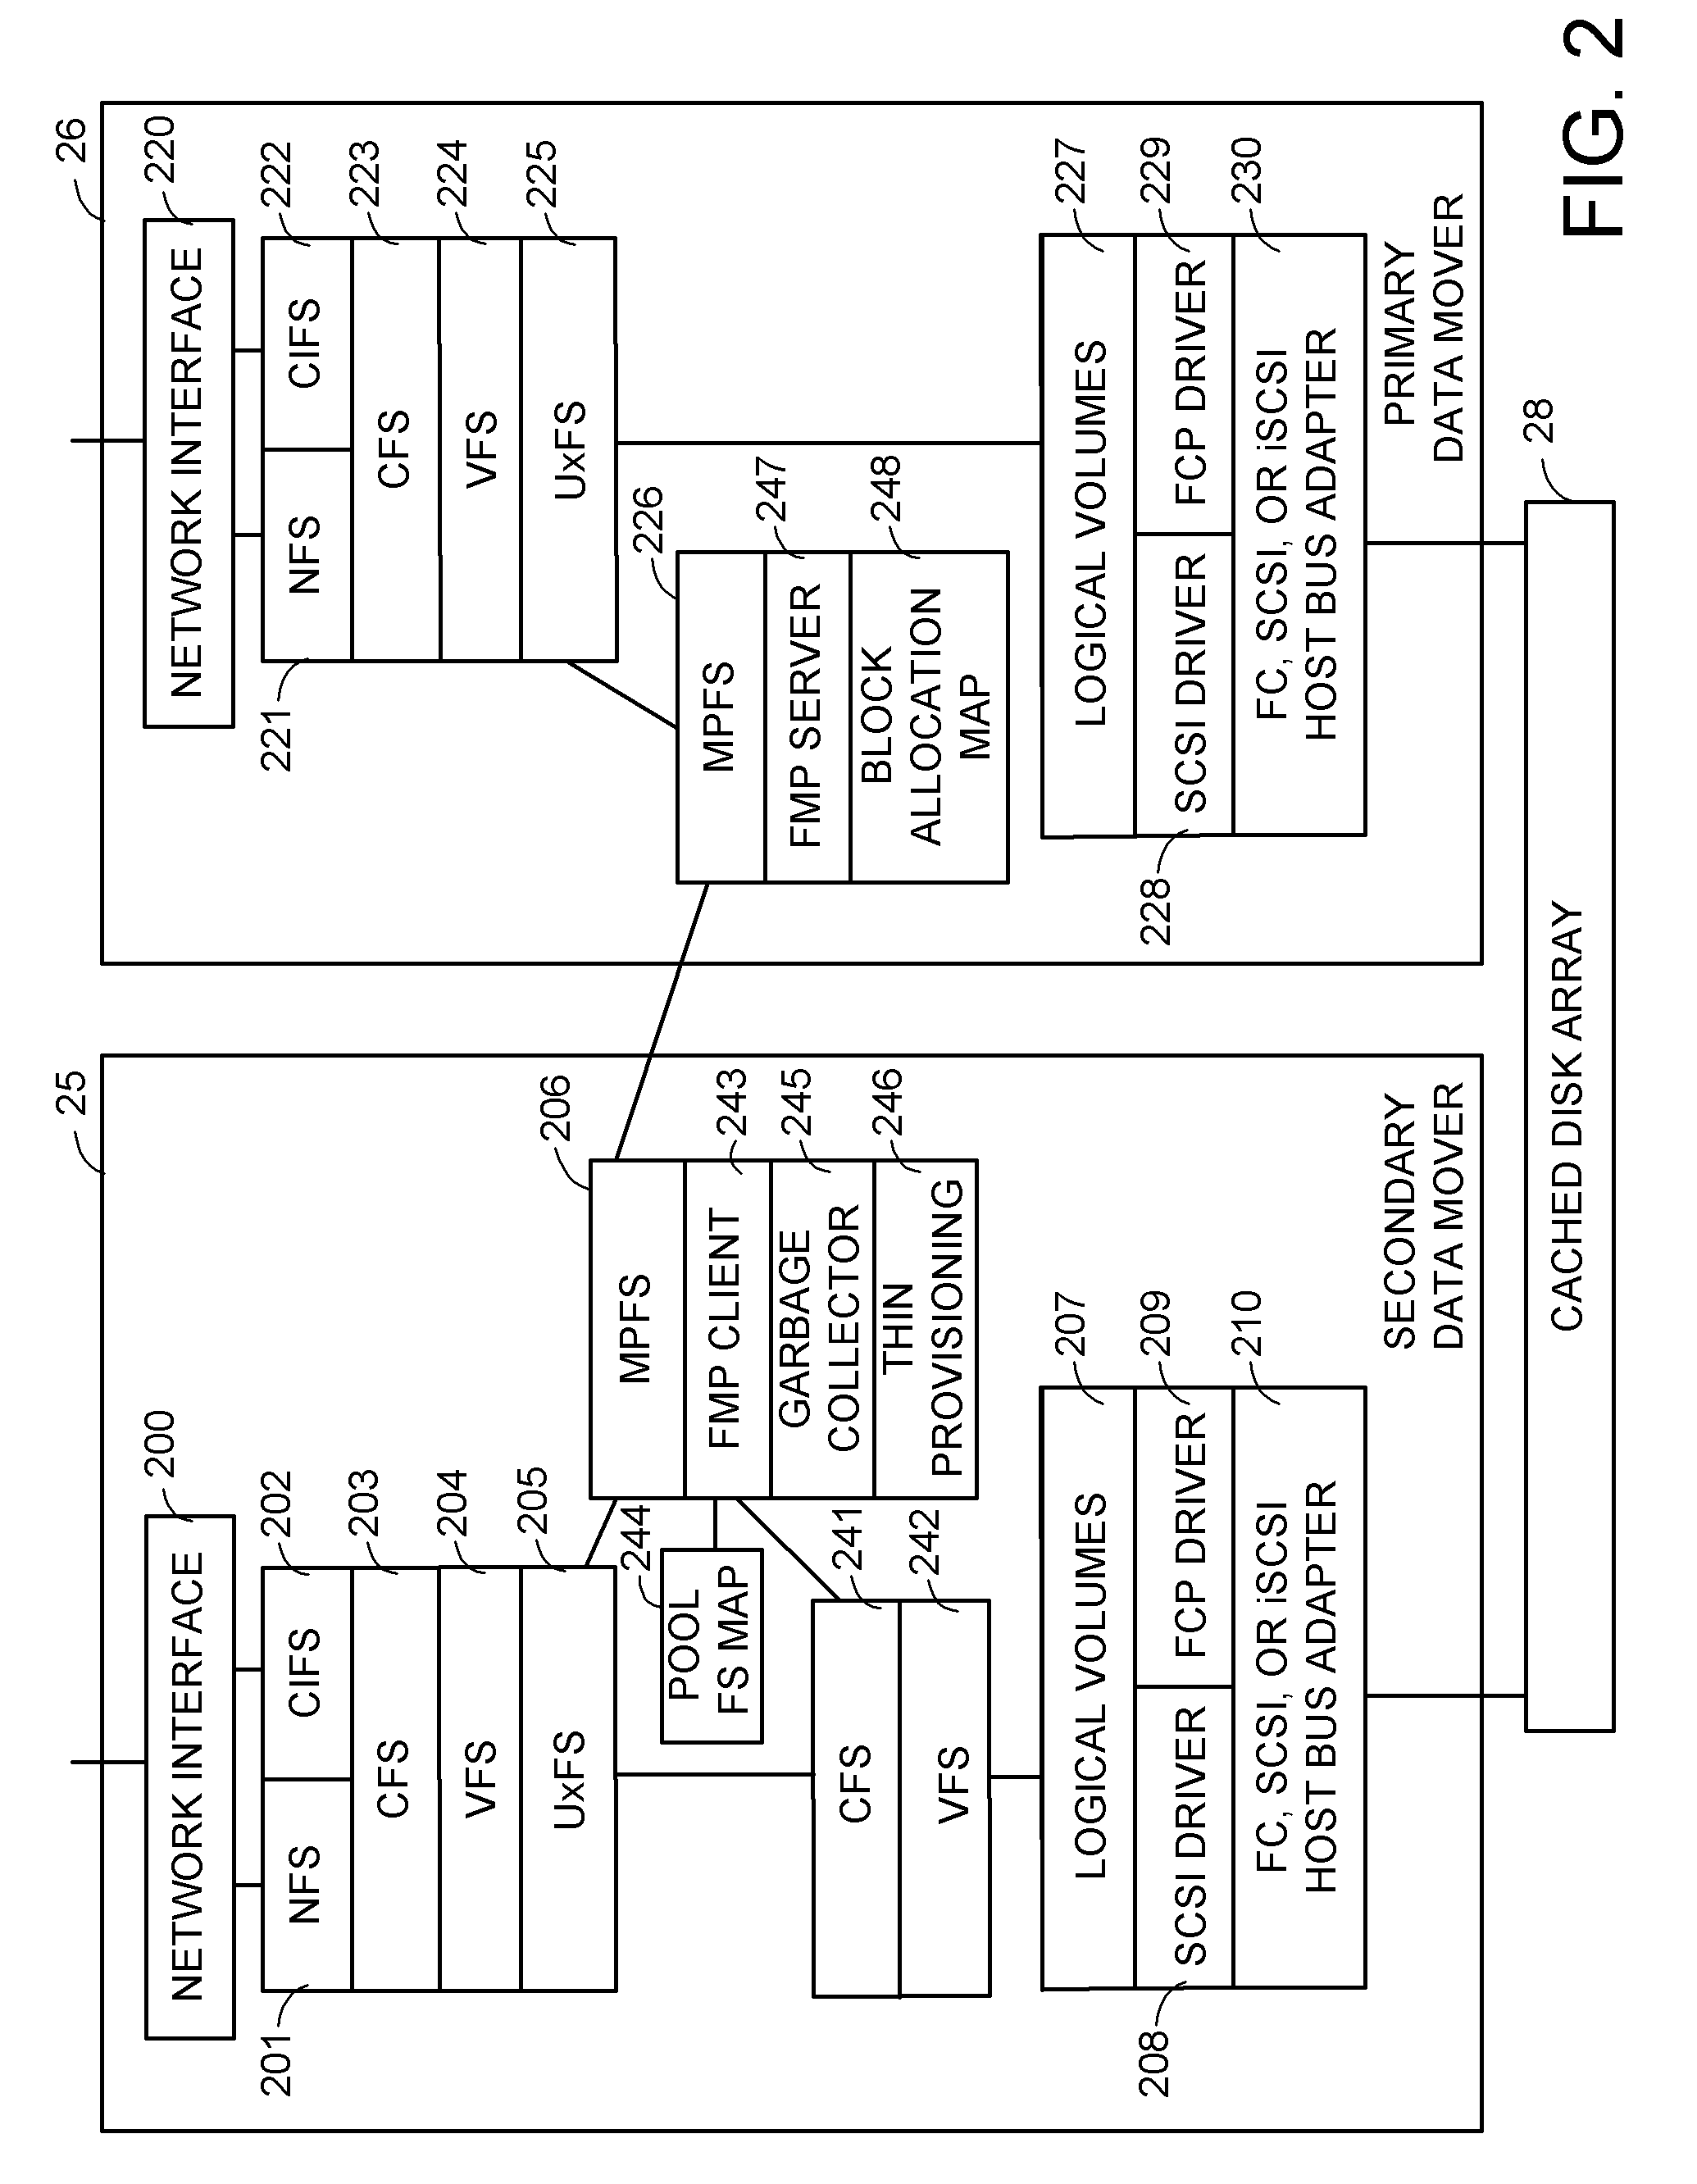 Distributed maintenance of snapshot copies by a primary processor managing metadata and a secondary processor providing read-write access to a production dataset